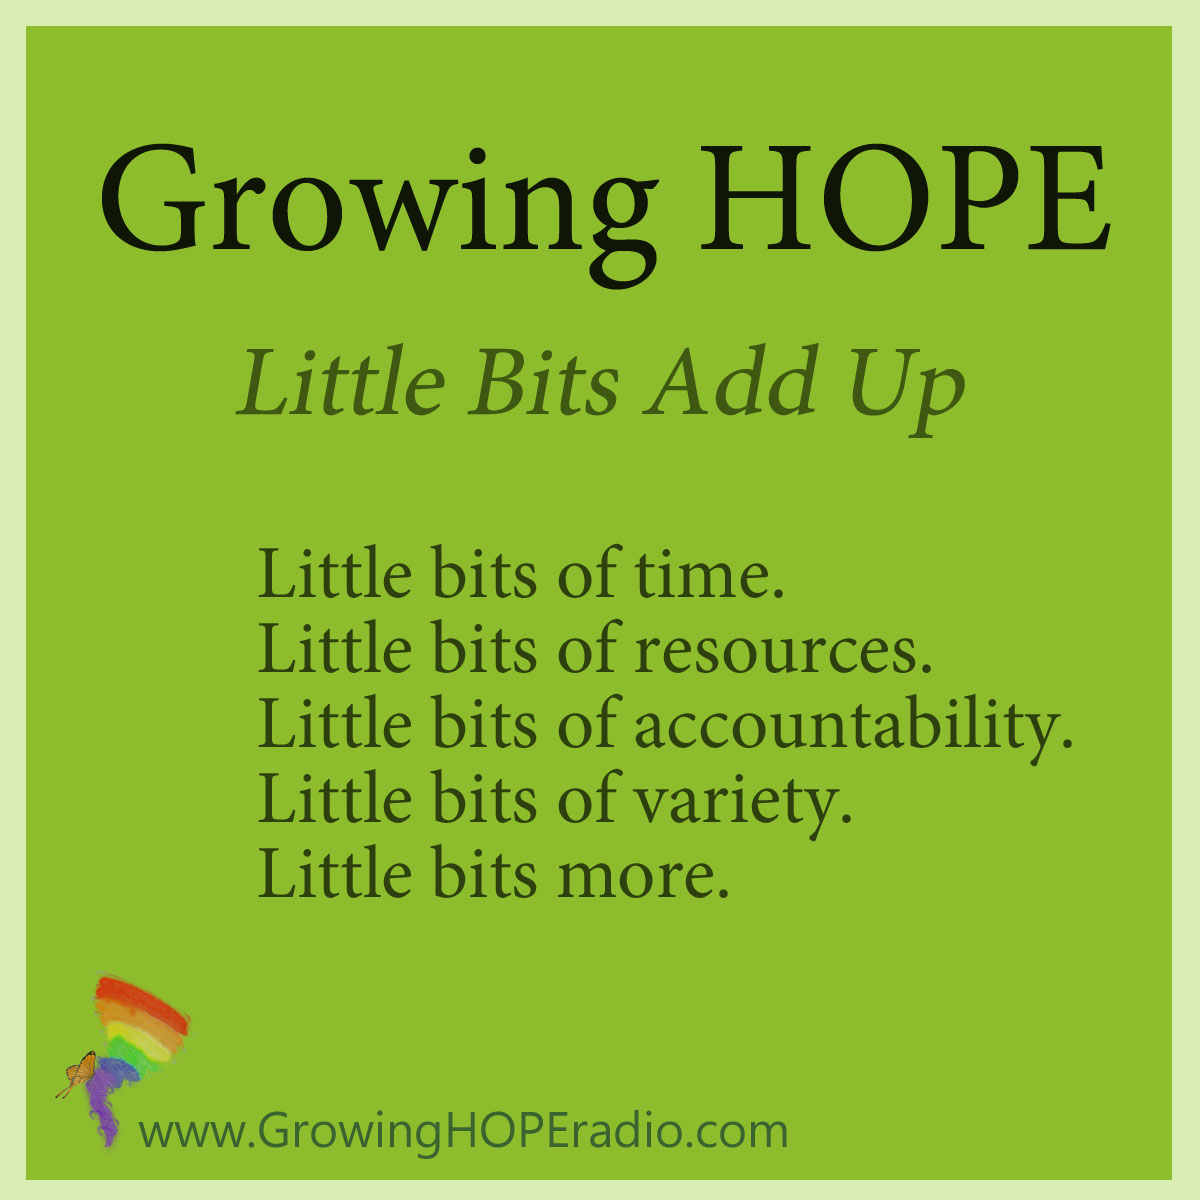 Growing HOPE Daily - five points - little bits